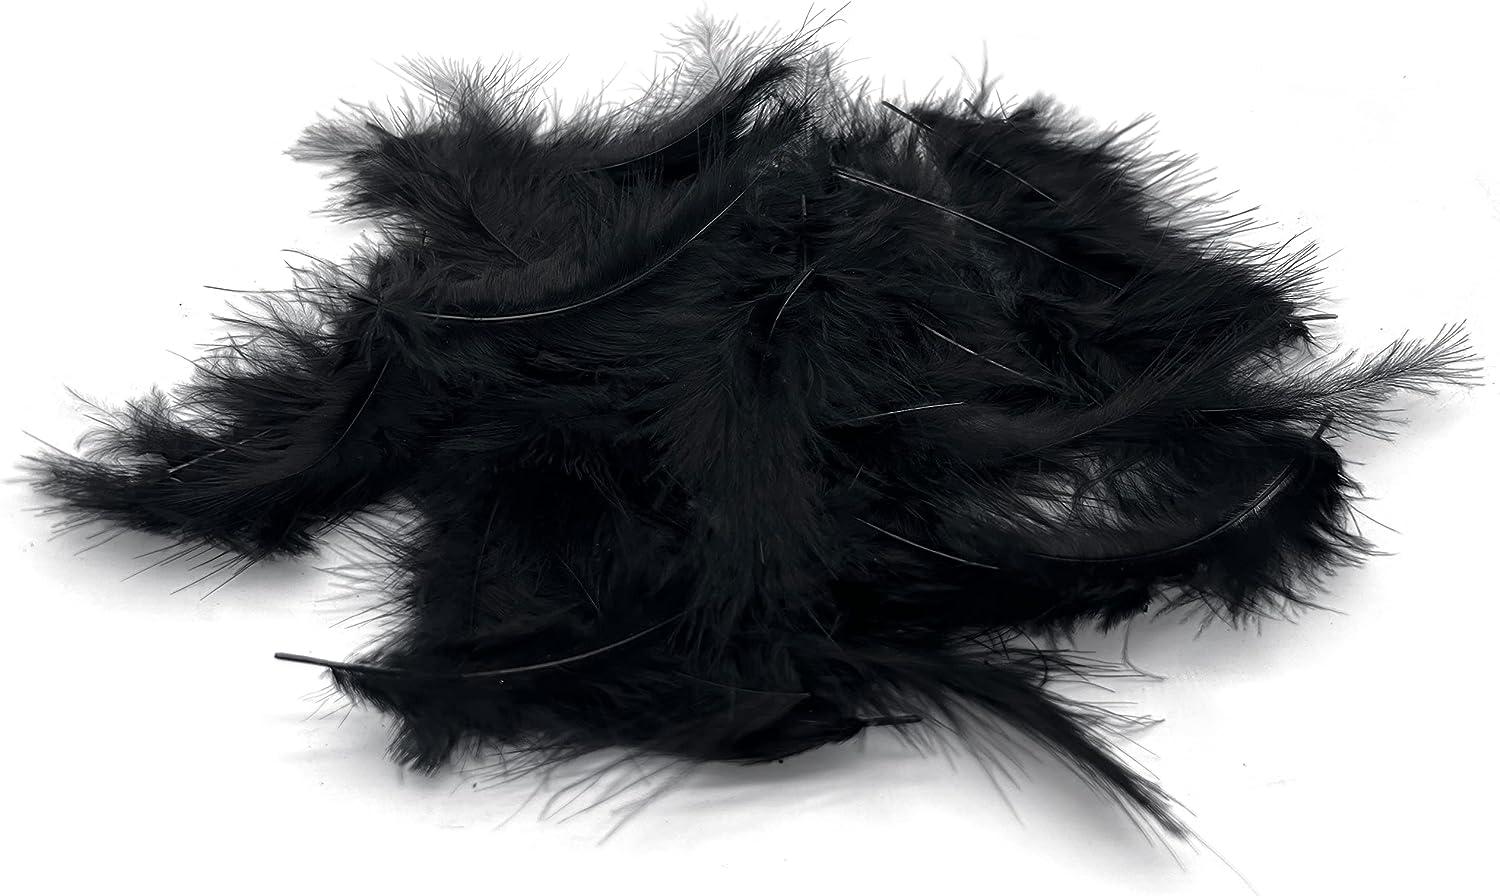 100pcs 4-6 Black Feathers for Crafts and Dreamcatcher Making, Fringe Trim  and DIY Projects, Colored Feathers Material